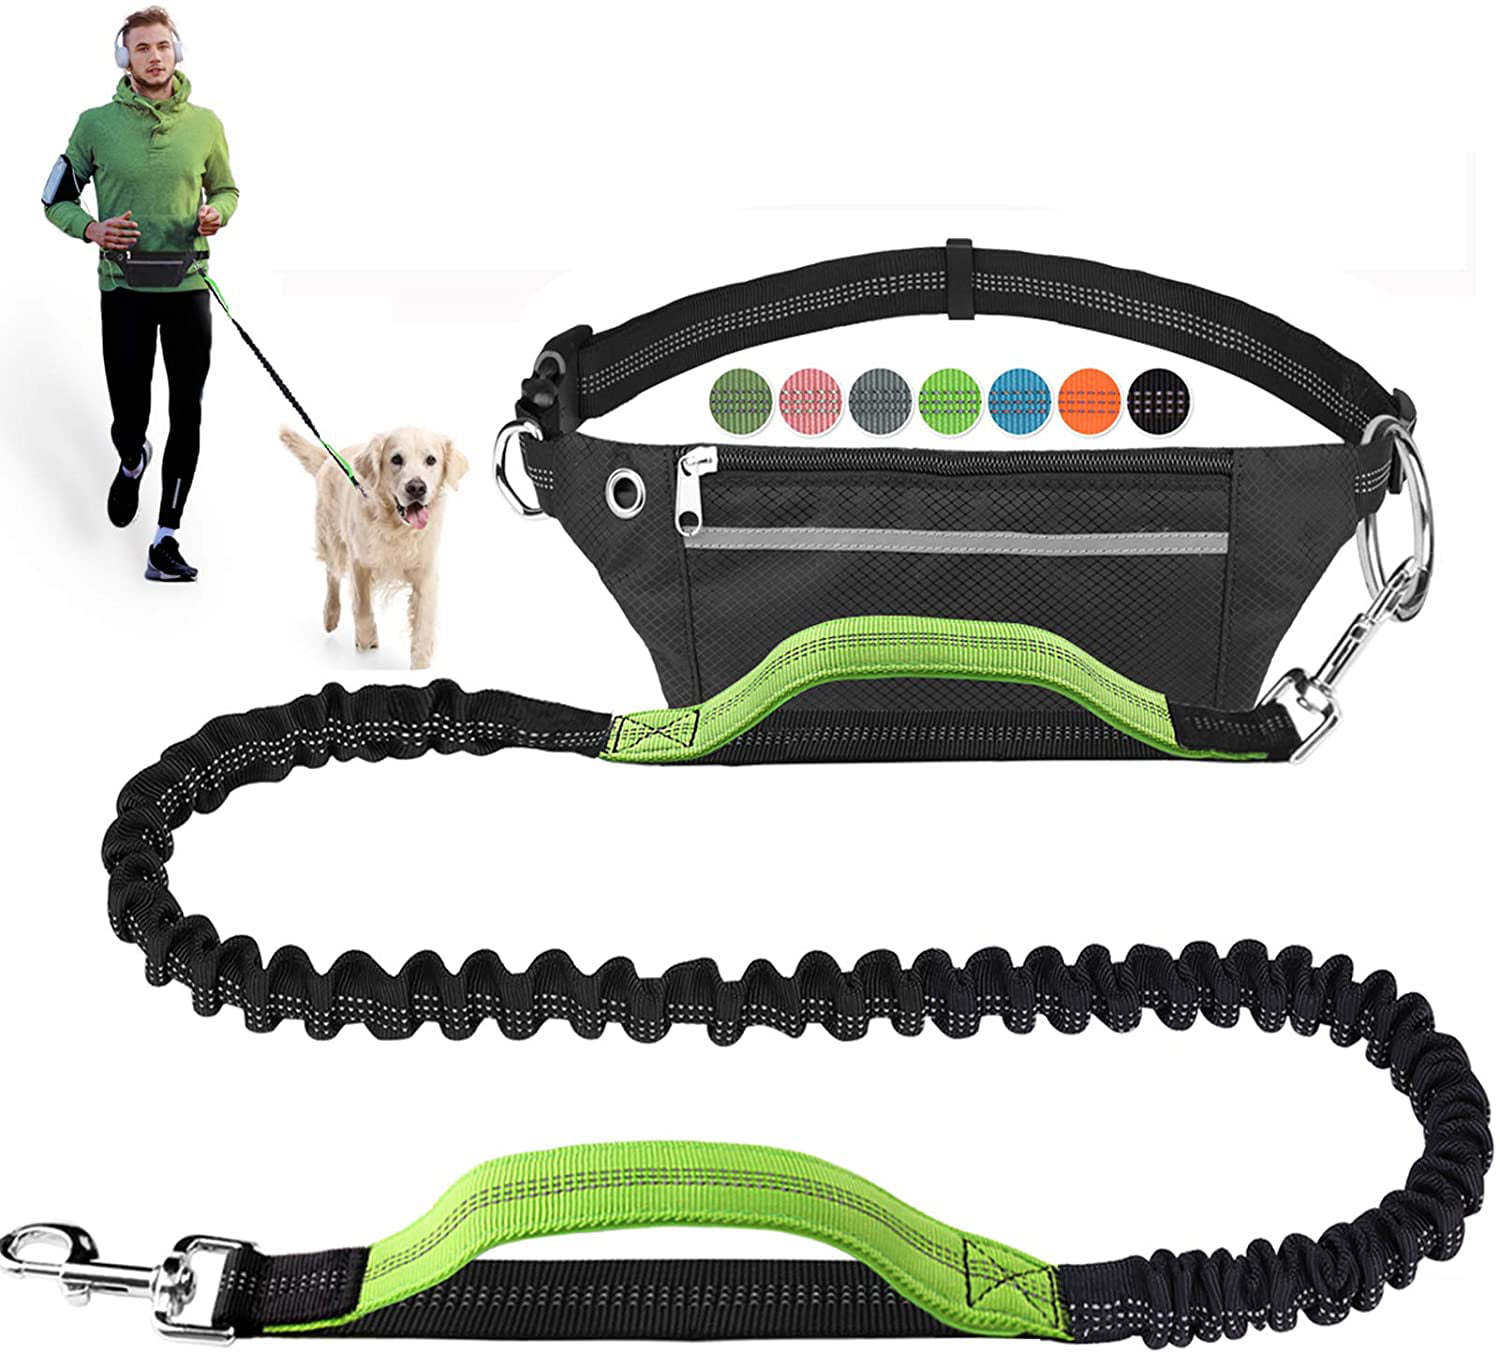 Dual Handle Black Adjustable Waist Belt Reflective Stitches Retractable Bungee Dog Running Waist Leash for Medium to Large Dogs MWD Hands Free Dog Leash for Running Walking Jogging Training Hiking 